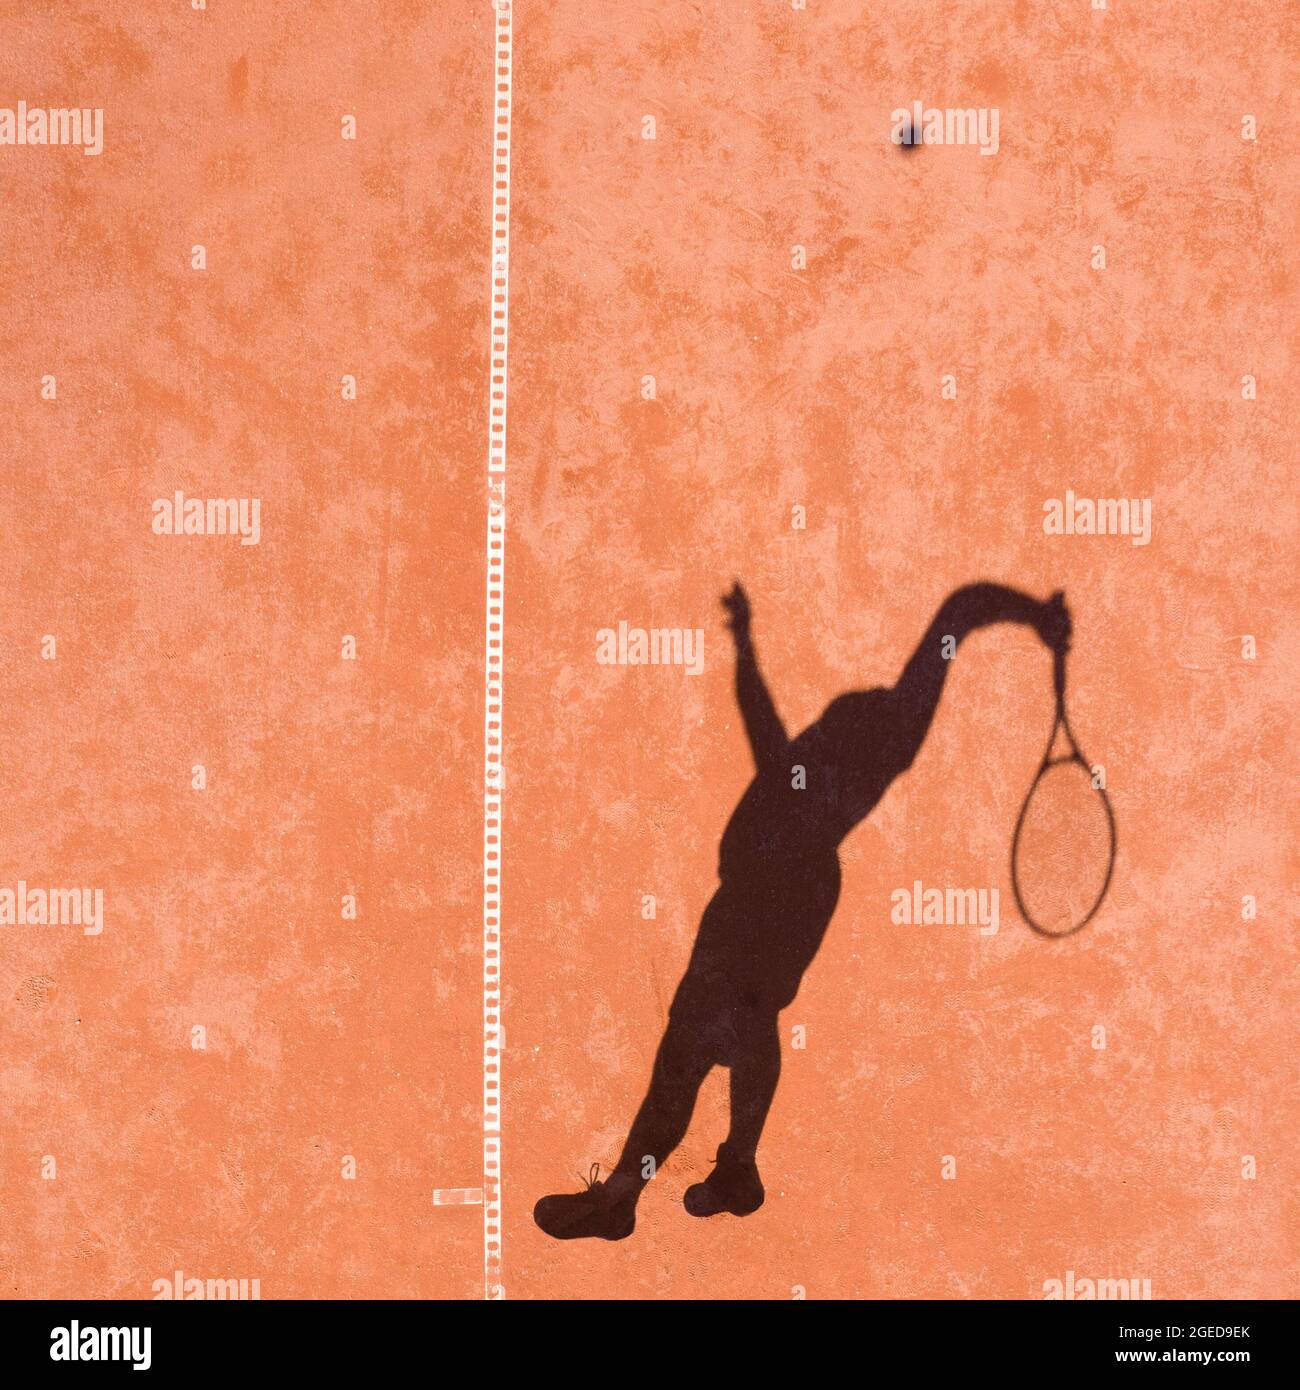 Shadow of a professional tennis player performing powerful first serve with a jump rebound Stock Photo